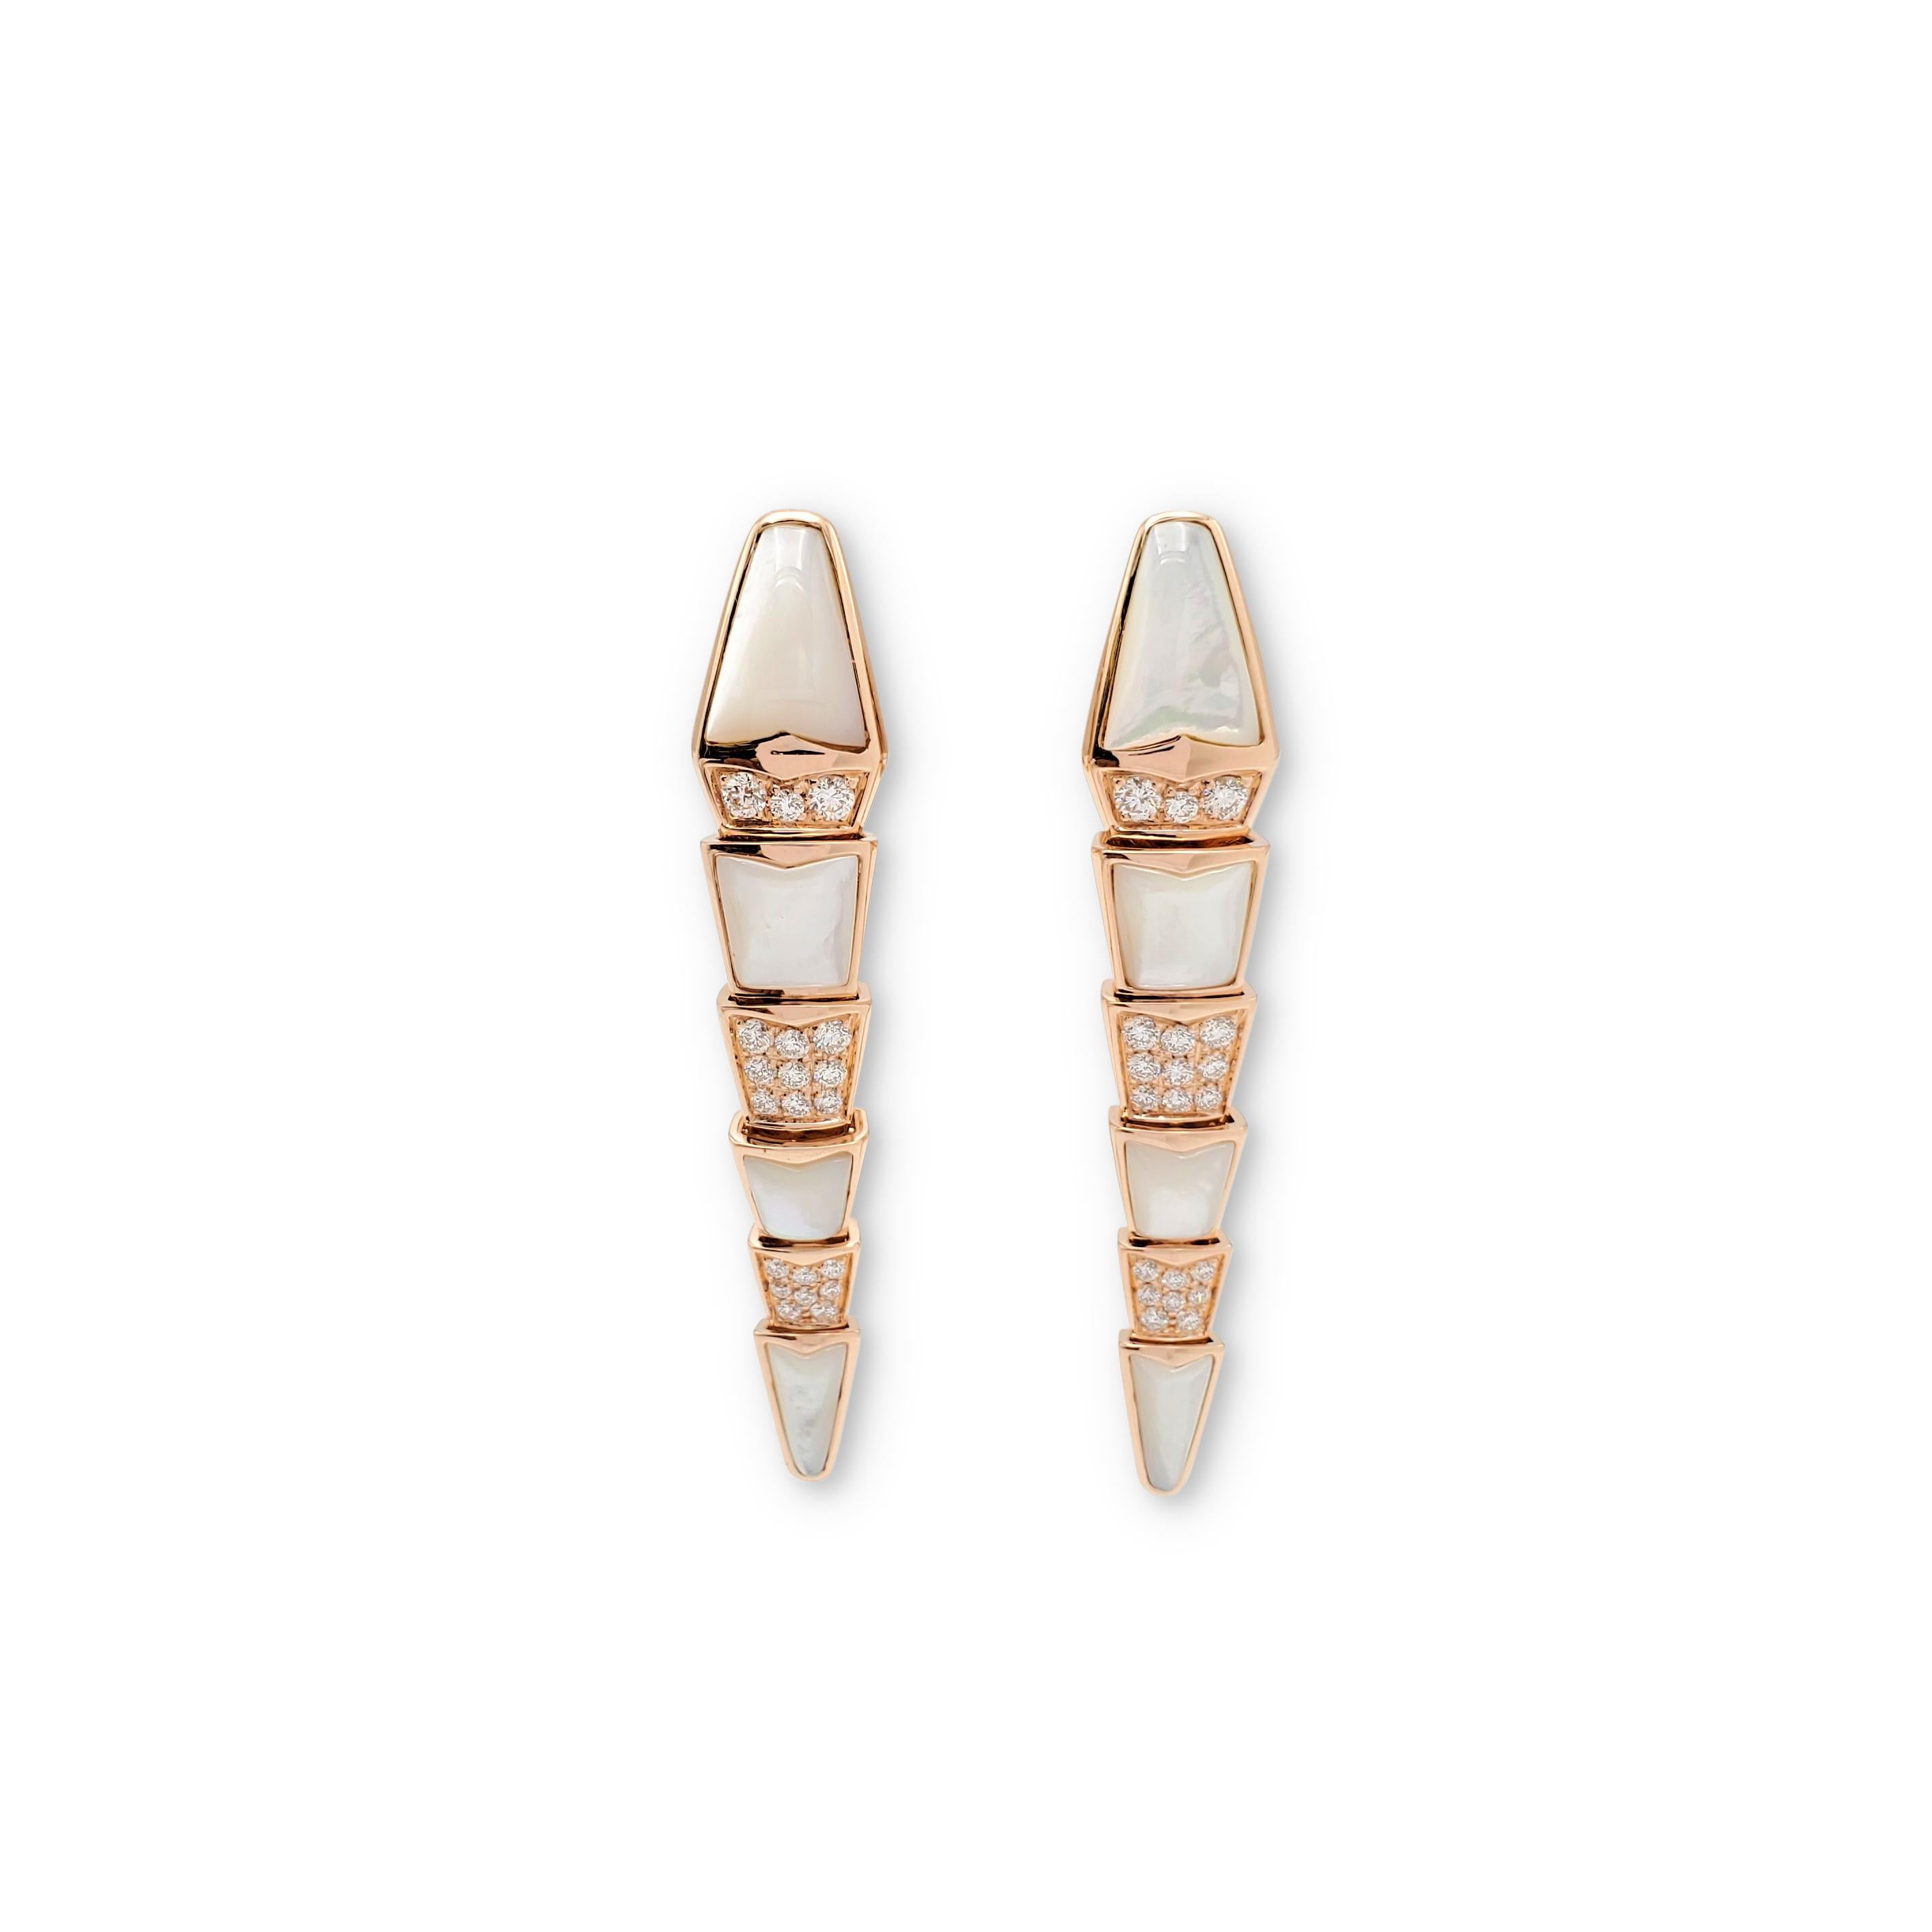 Authentic Bvlgari 'Serpenti' earrings crafted in 18 karat rose gold feature stacked geometric diamond and mother-of-pearl links resembling a snake's scales. The earrings are set with an estimated 0.85 carats total weight (E-F color, VS clarity). The